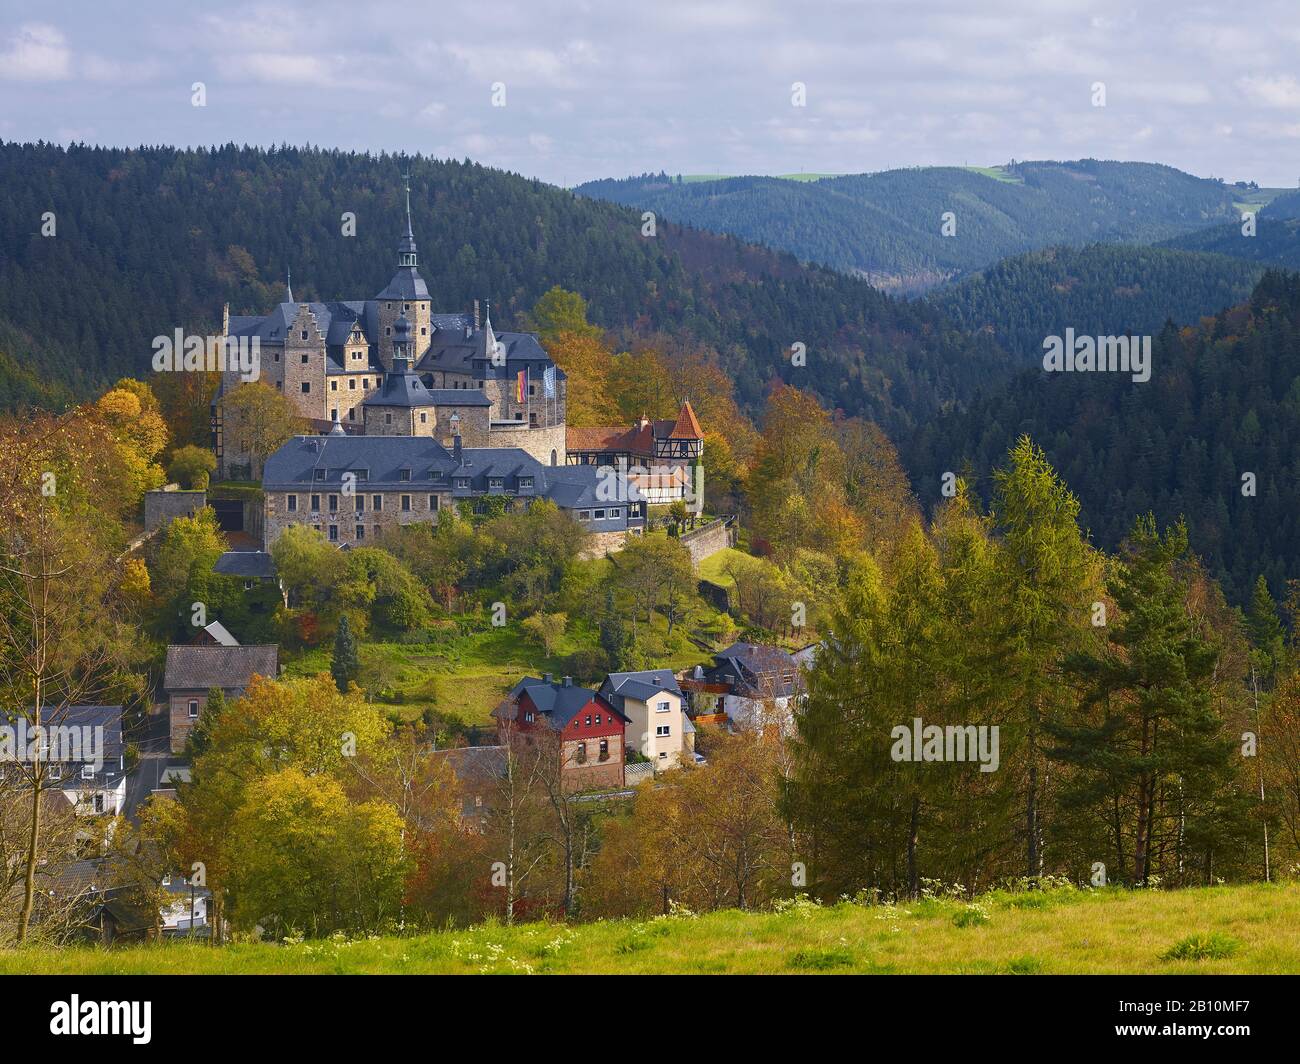 Lauenstein Castle and town near Ludwigsstadt, Upper Franconia, Bavaria, Germany Stock Photo